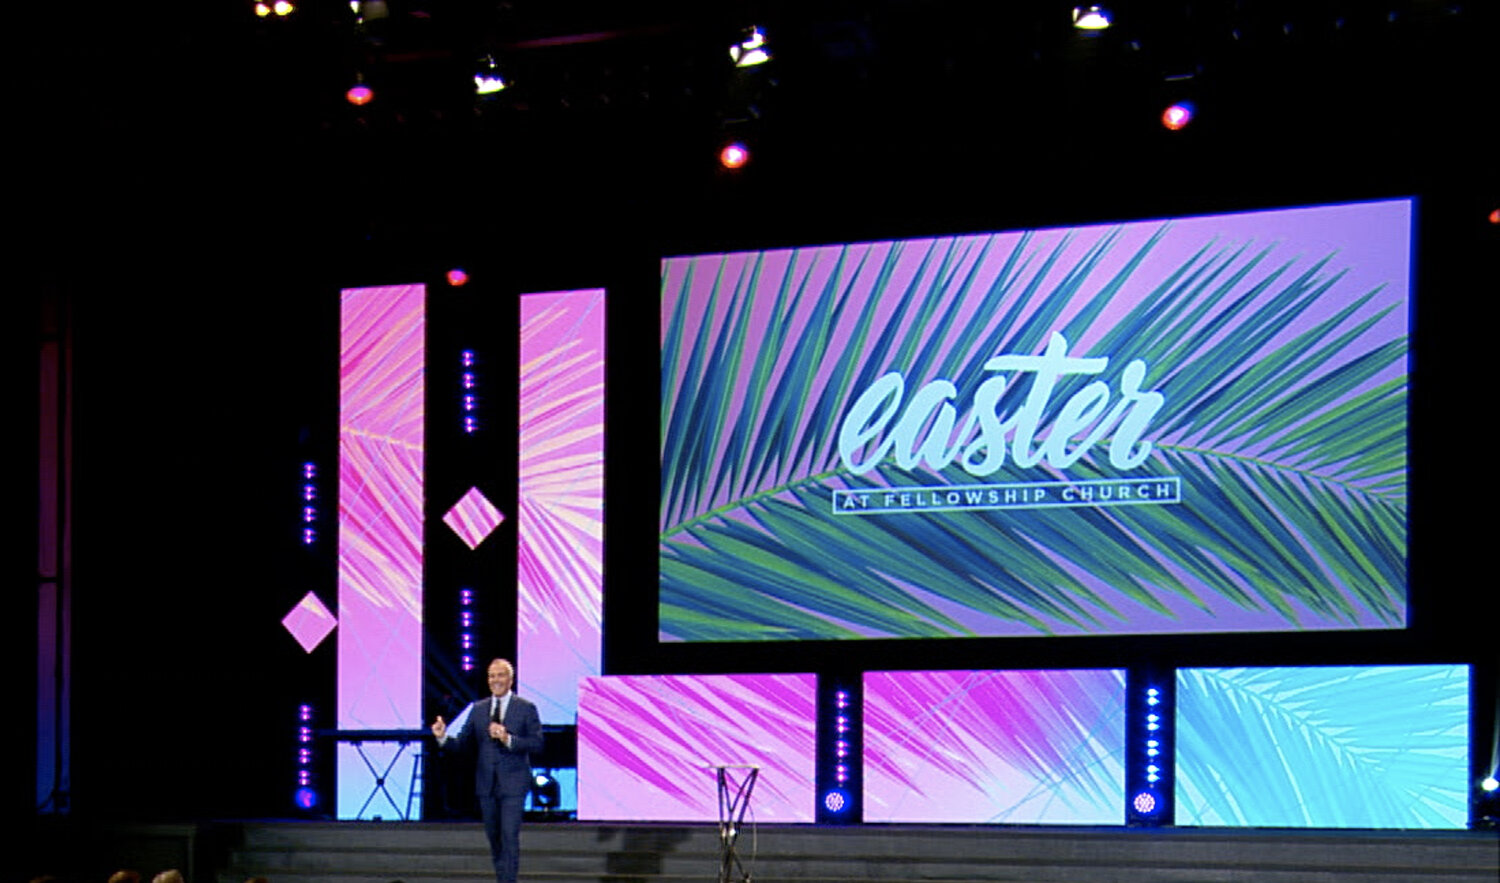 Celebrate Easter At Fellowship Church — Interfaith Broadcasting Commission